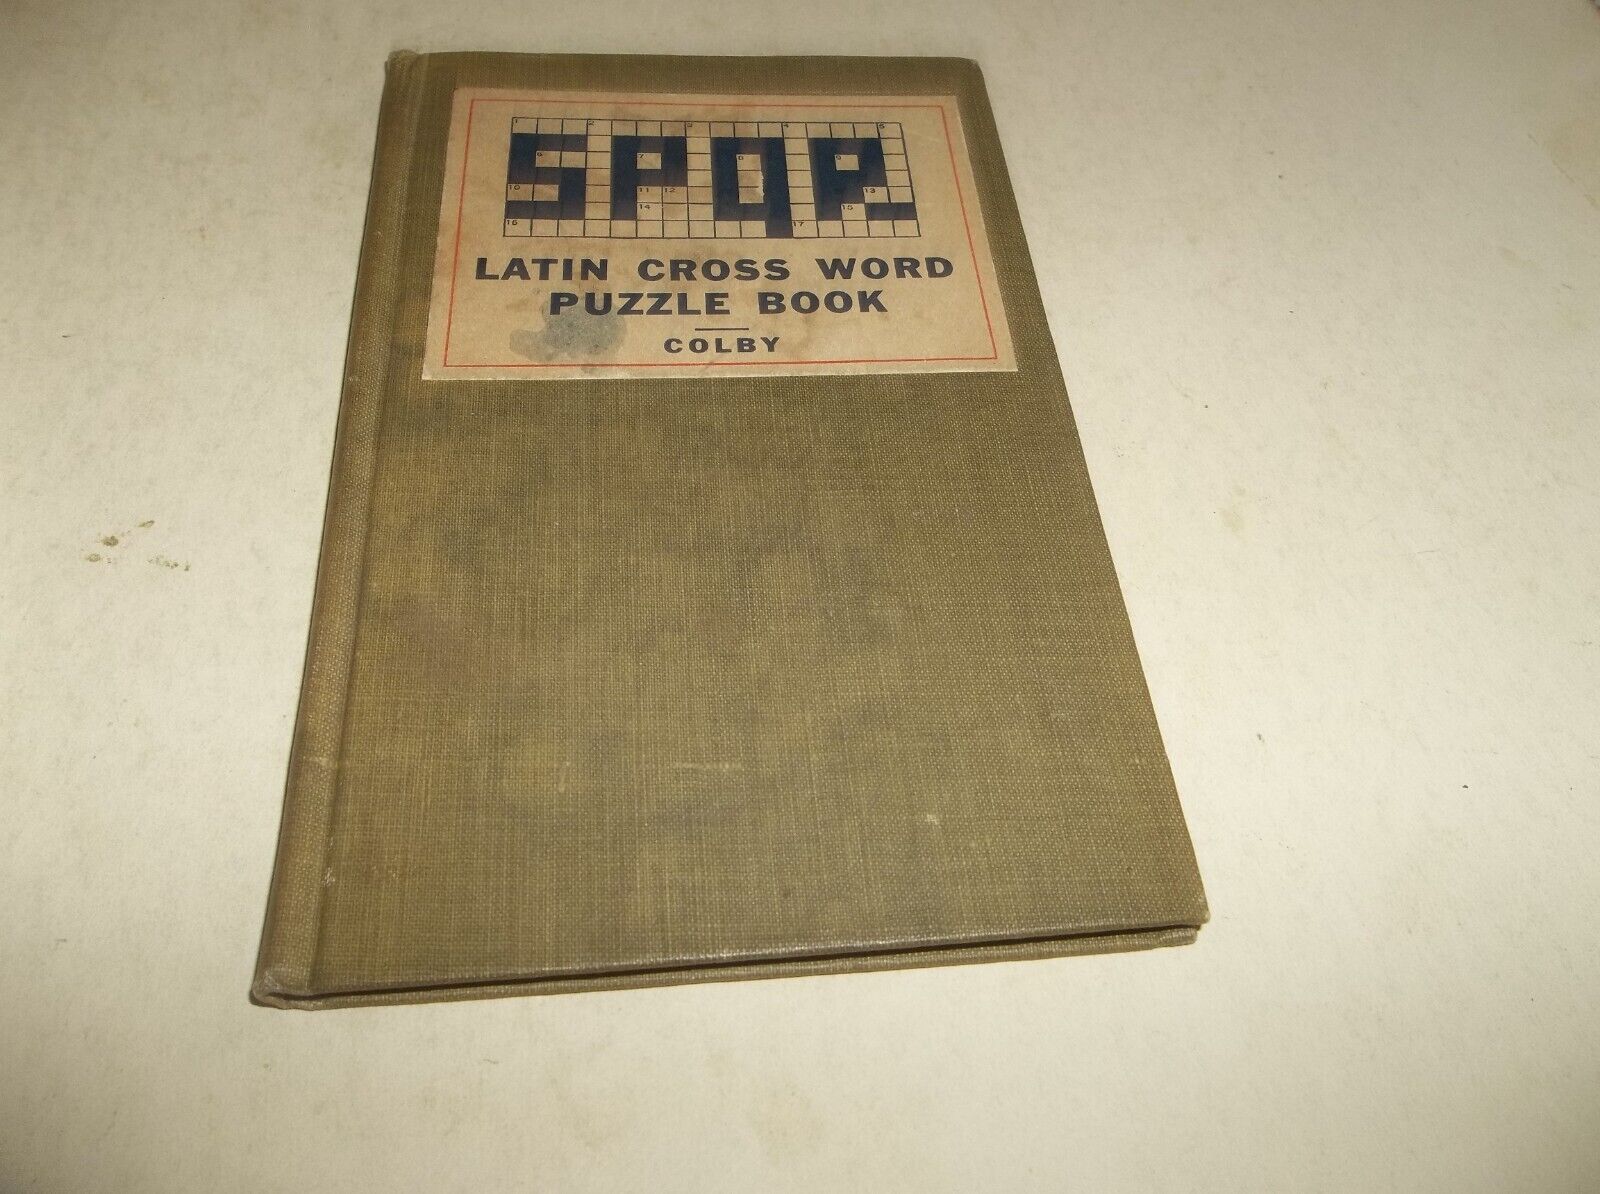 1925 Latin Cross Word Puzzle Book by John Kingsbury Colby EXCELLENT